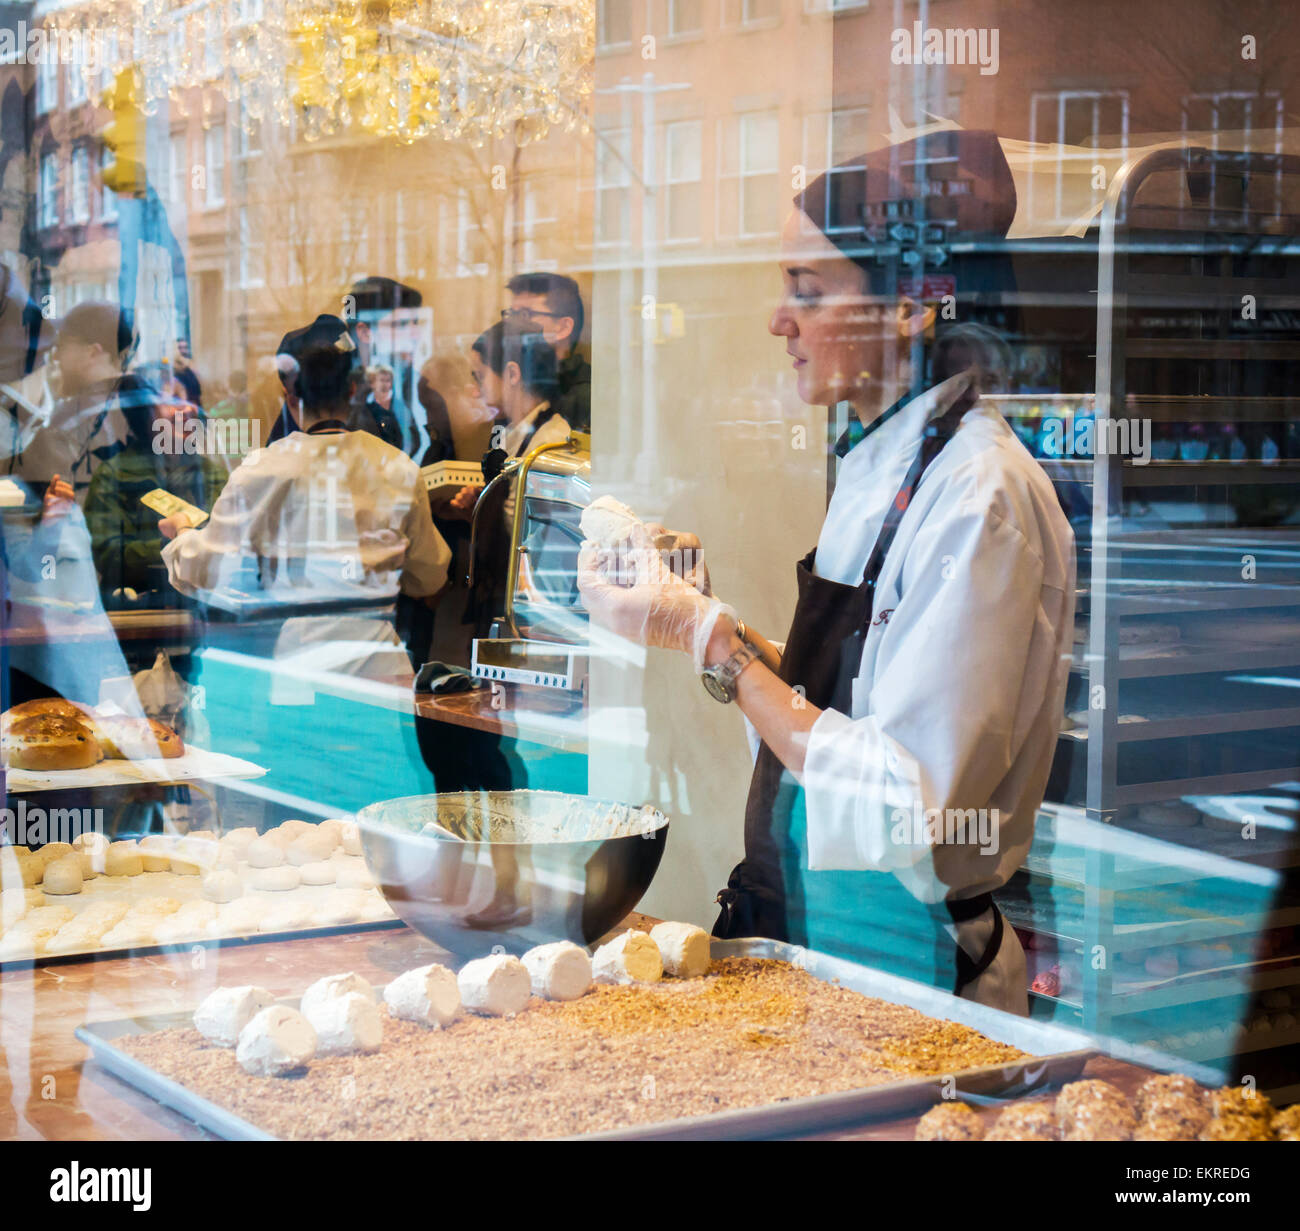 A pastry worker prepares merveilleux (wonderfuls) in the window of Aux Merveilleux du Fred in Greenwich Village in New York on Sunday, April 5, 2015. Merveilleux are confections made of two meringues stuck together with whipped cream, then coated with whipped cream and then coated with chocolate or other flavors. (© Richard B. Levine) Stock Photo